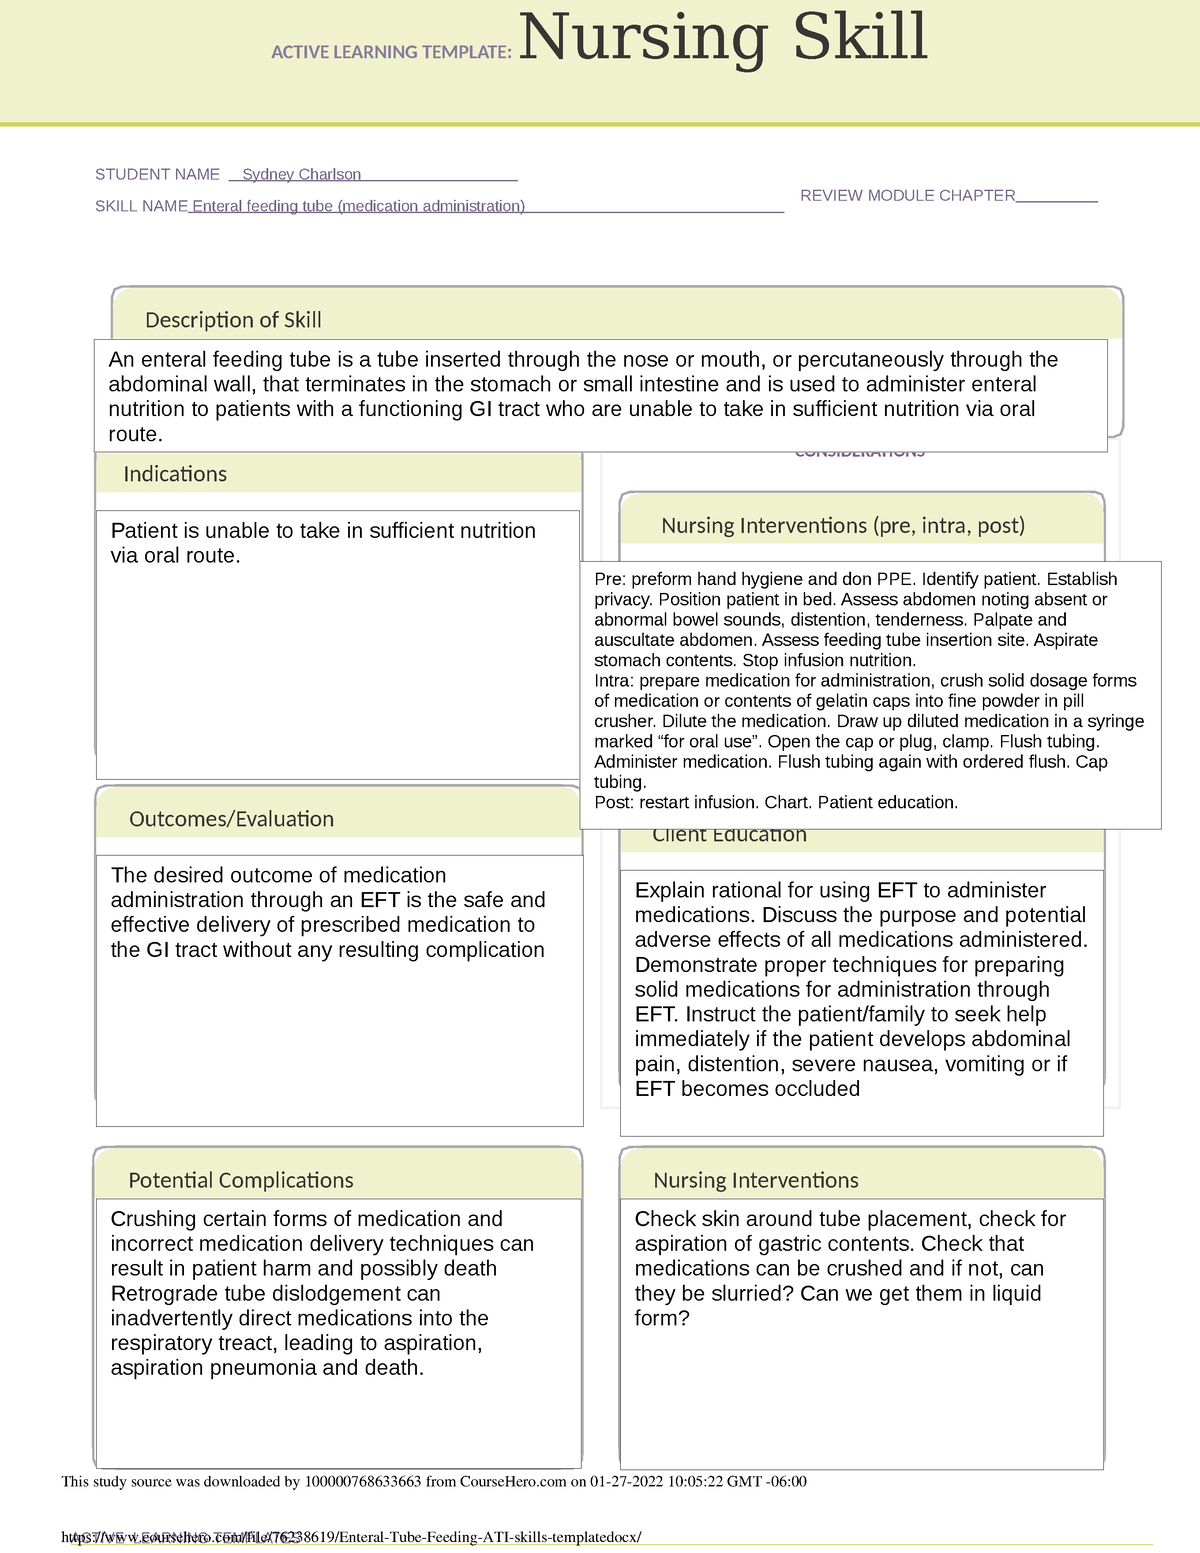 Enteral Tube Feeding ATI skills template ACTIVE LEARNING TEMPLATE